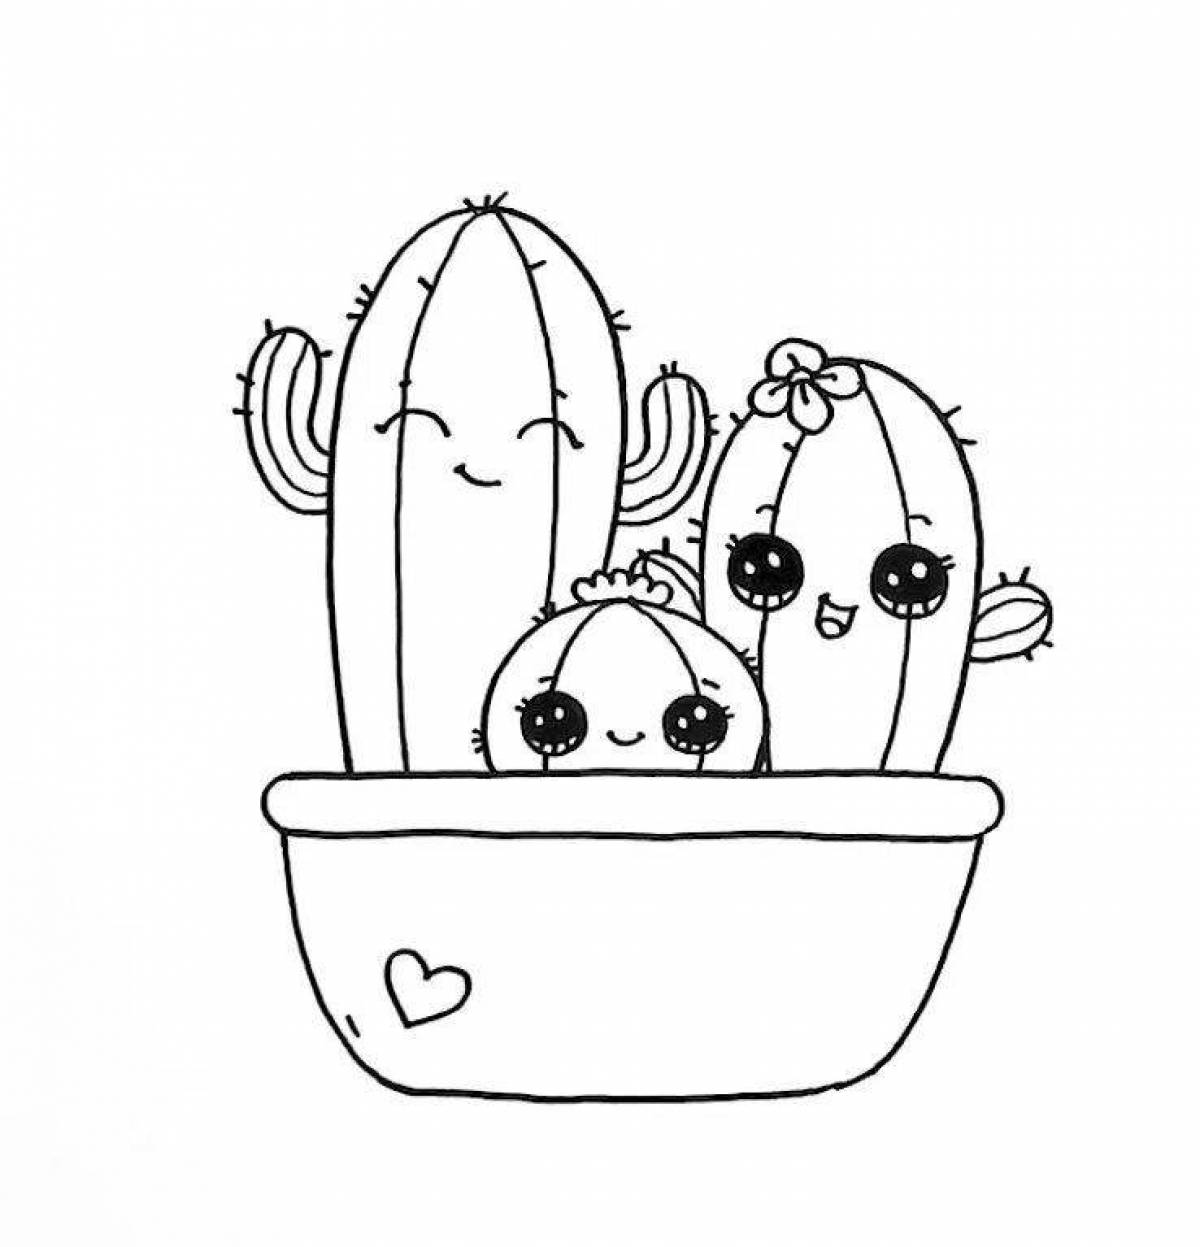 Cute cactus coloring page